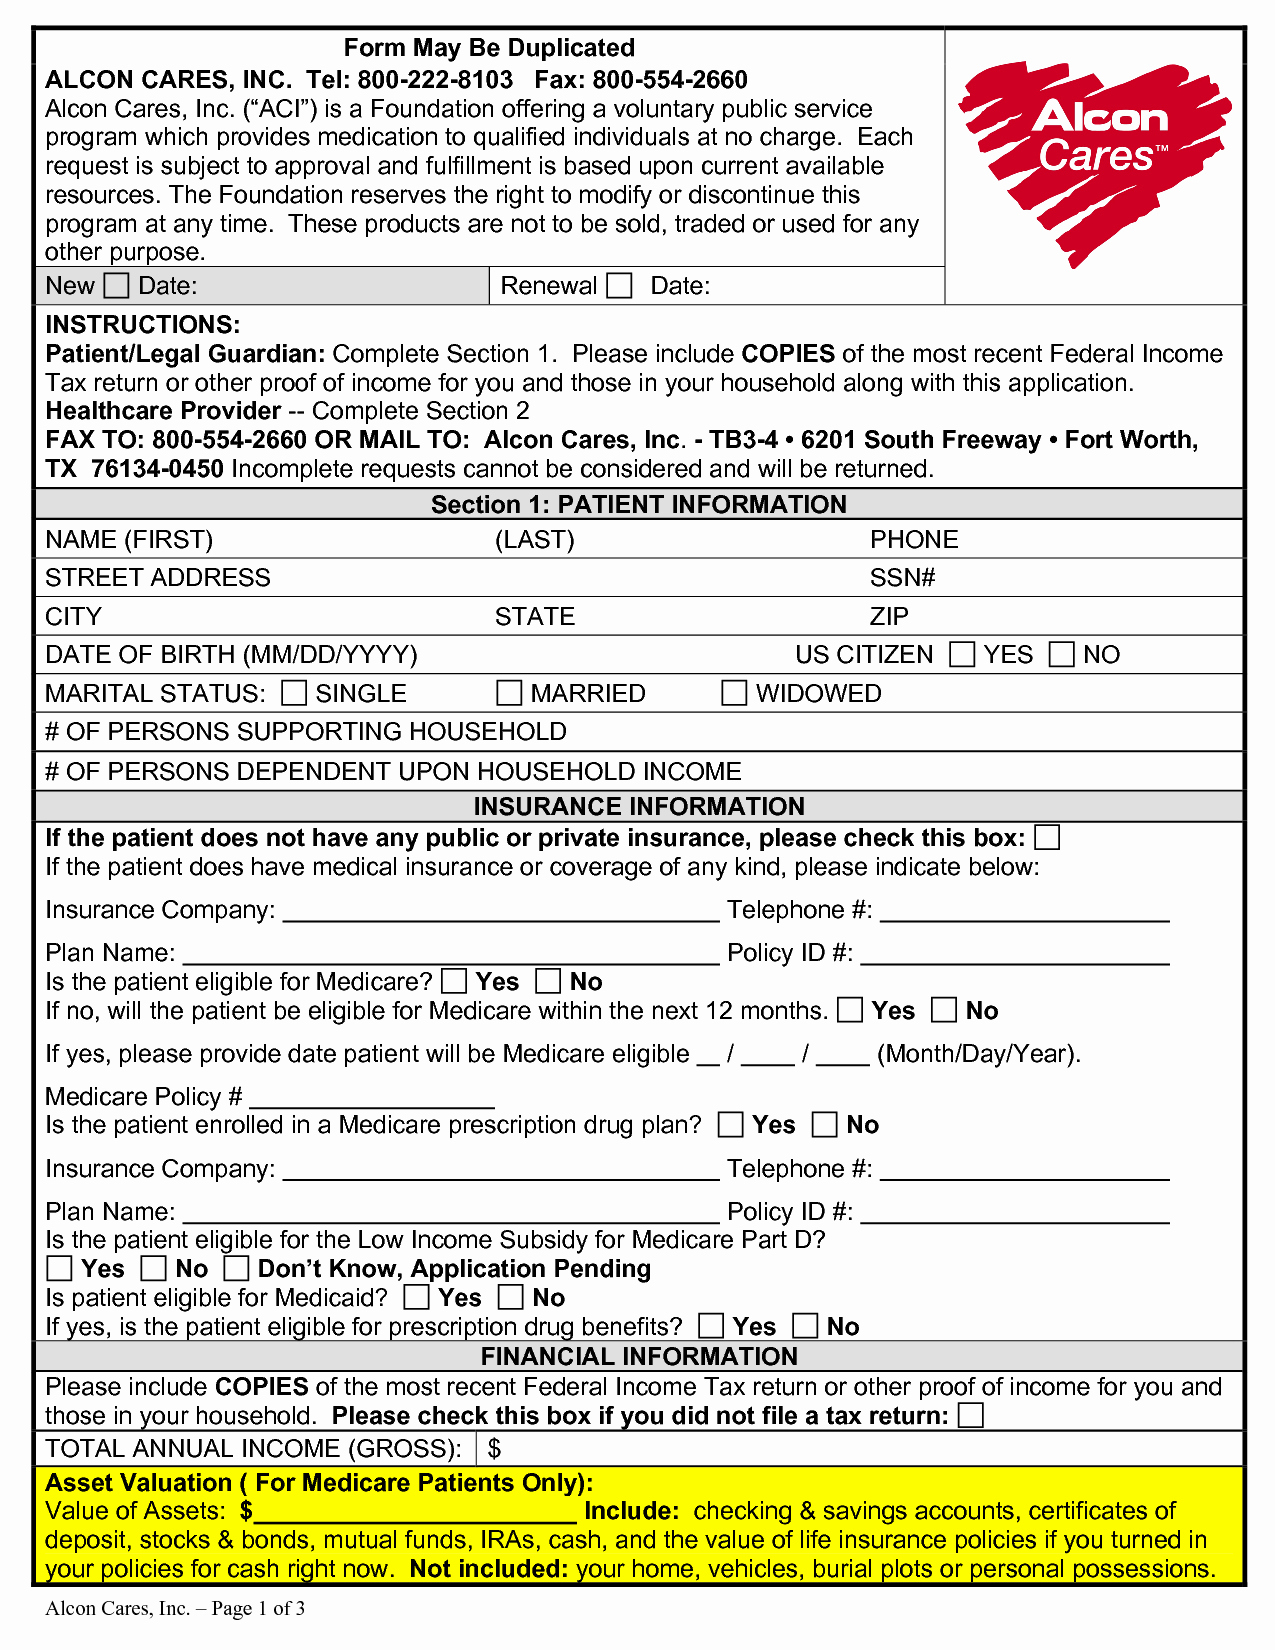 Ohio Medical Power Of Attorney Forms Free Printable - 8.18 - Free Printable Medical Power Of Attorney